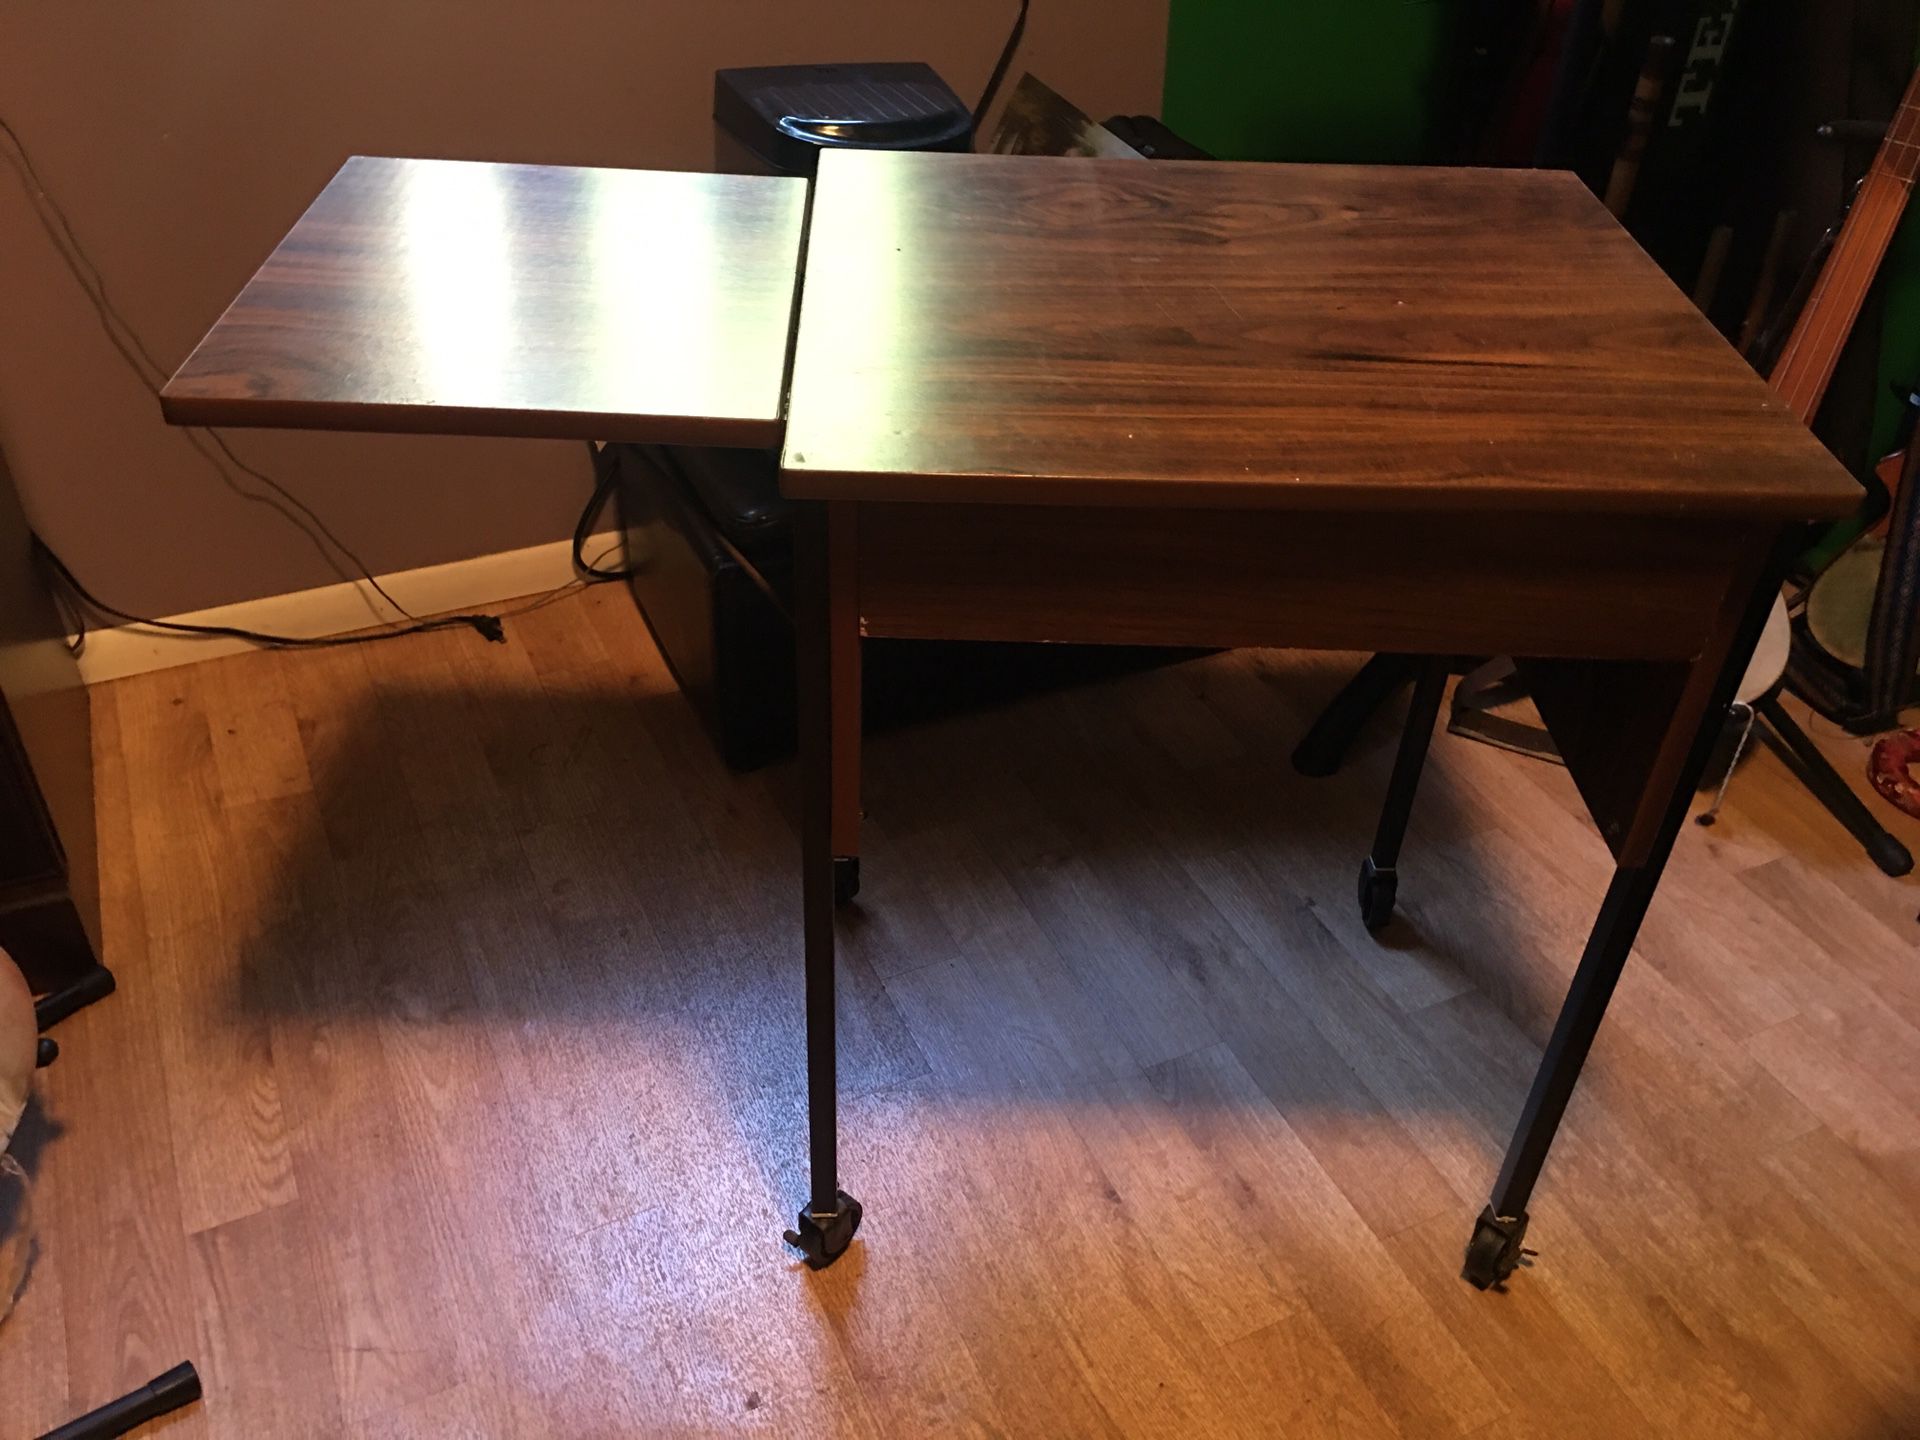 End table with top drawer, extension and 4 wheels on bottom